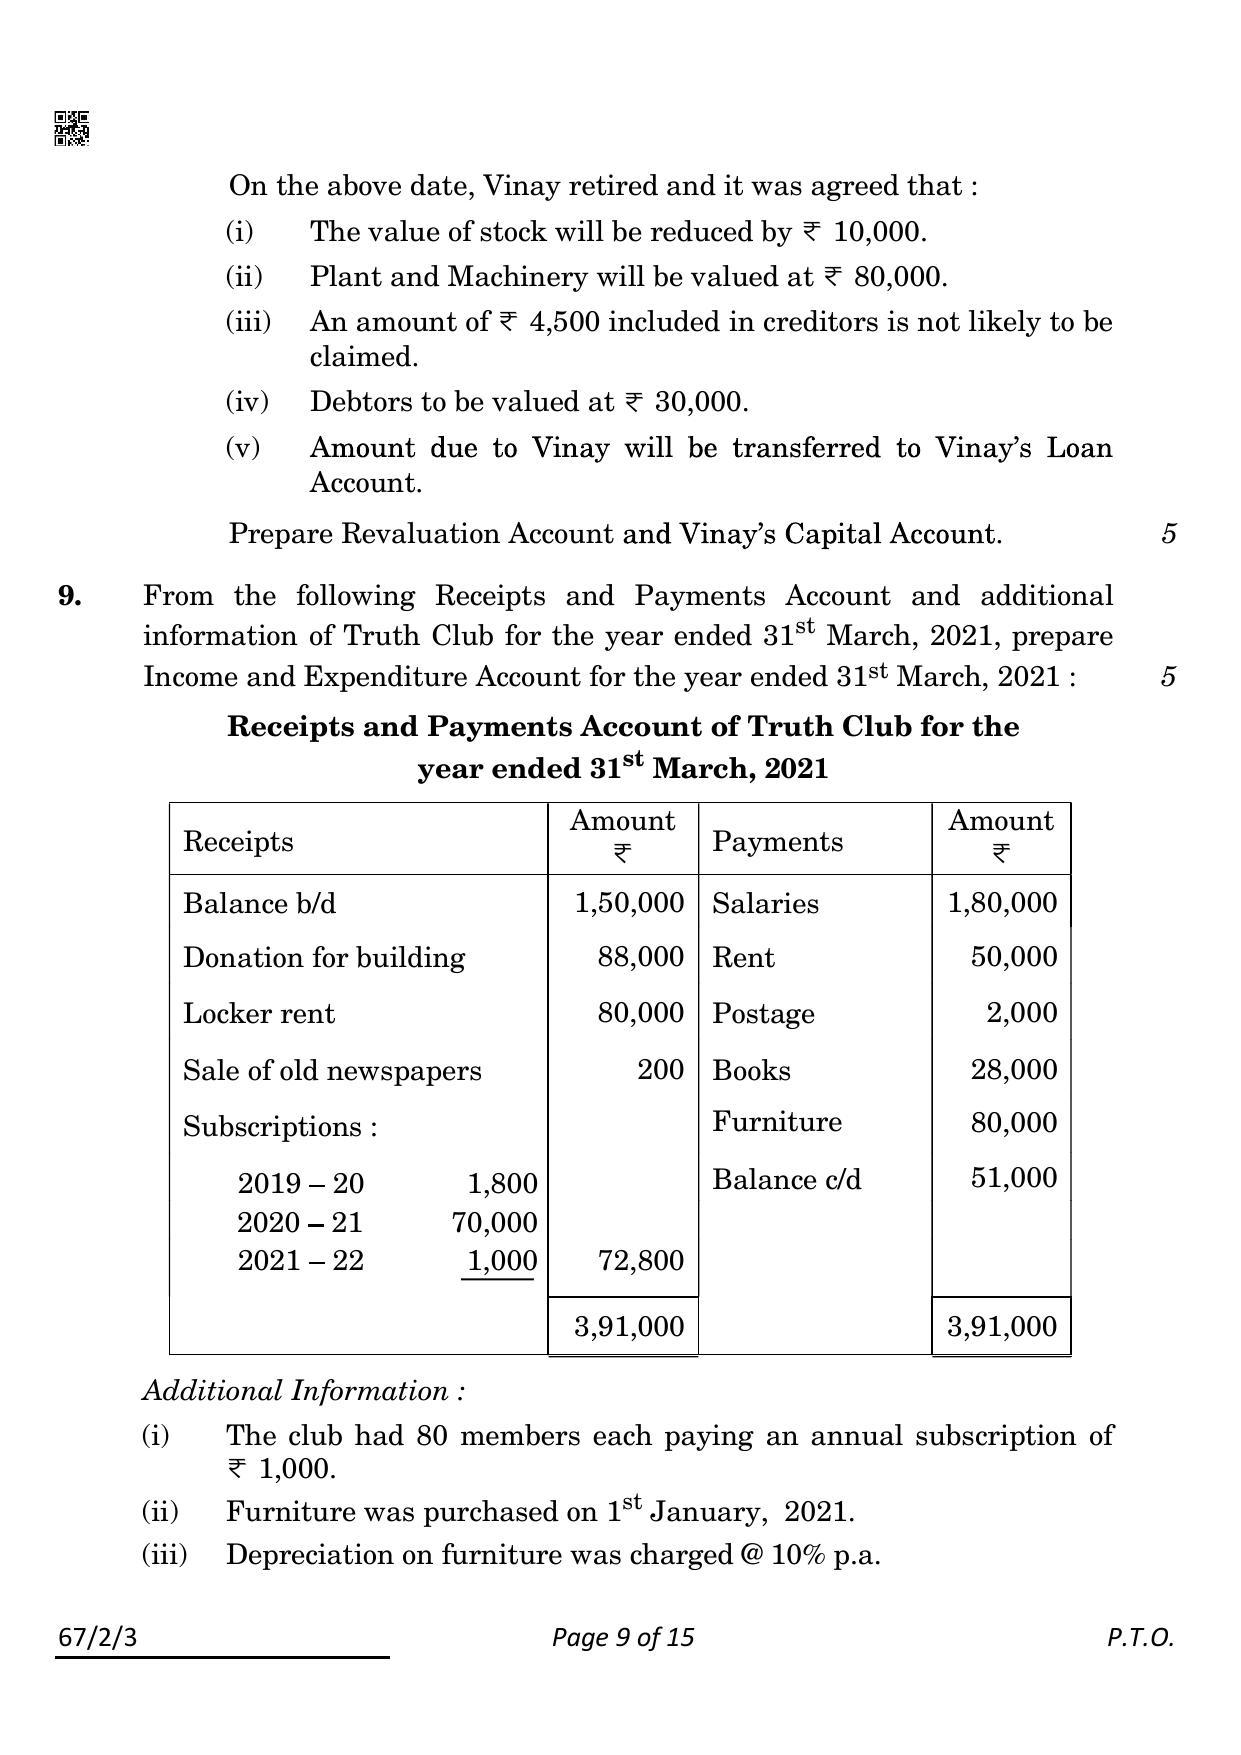 CBSE Class 12 67-2-3 Accountancy 2022 Question Paper - Page 9